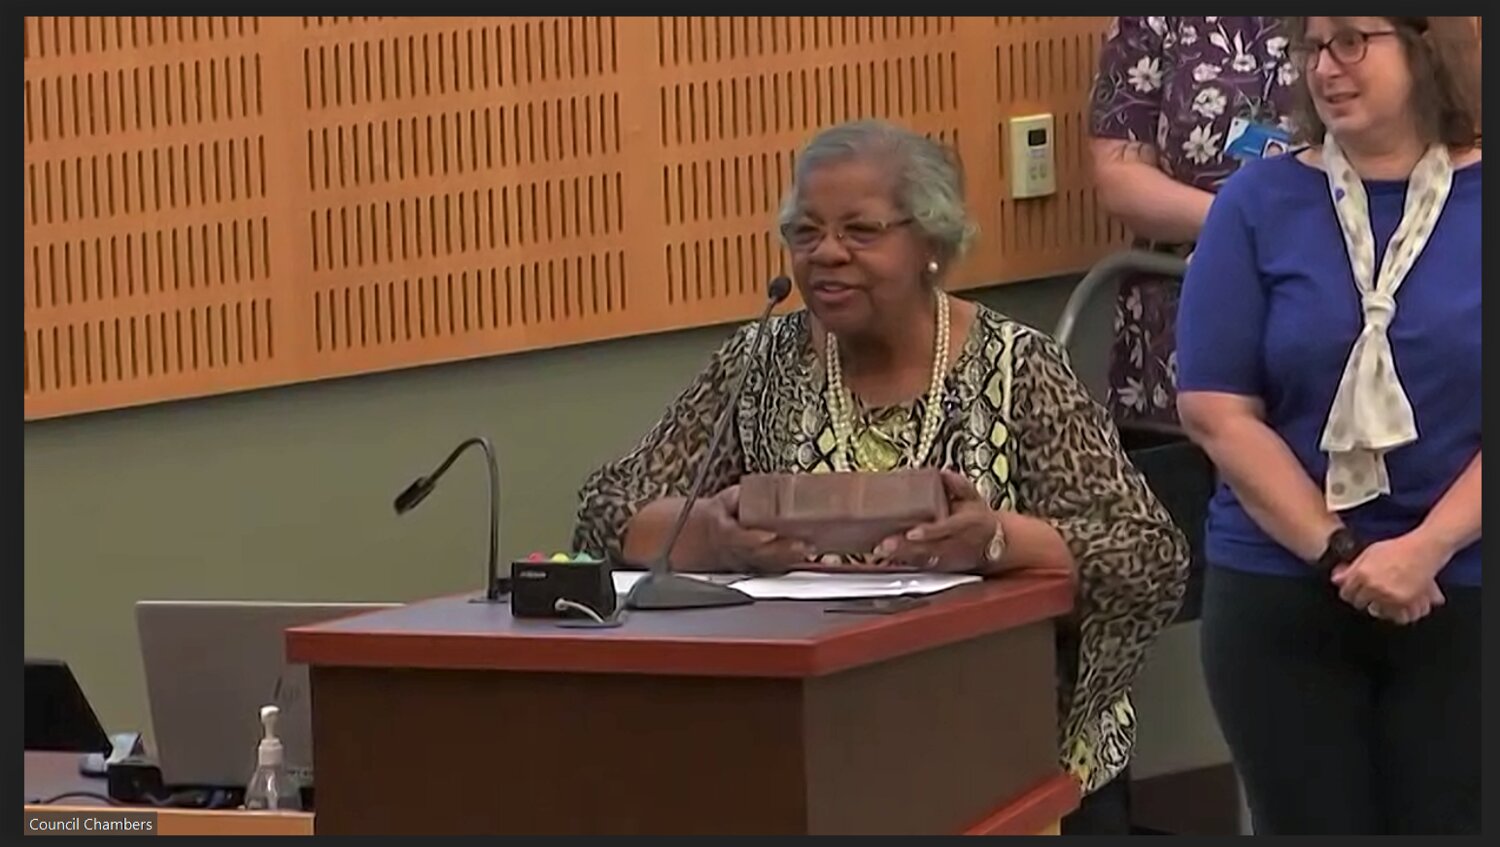 Dr. Thelma Jackson thanked the commission, she was awarded the Heritage Award in Olympia for her book Blacks in Thurston County, which tells the experiences of blacks during tumultuous times from 1950 to 1975.